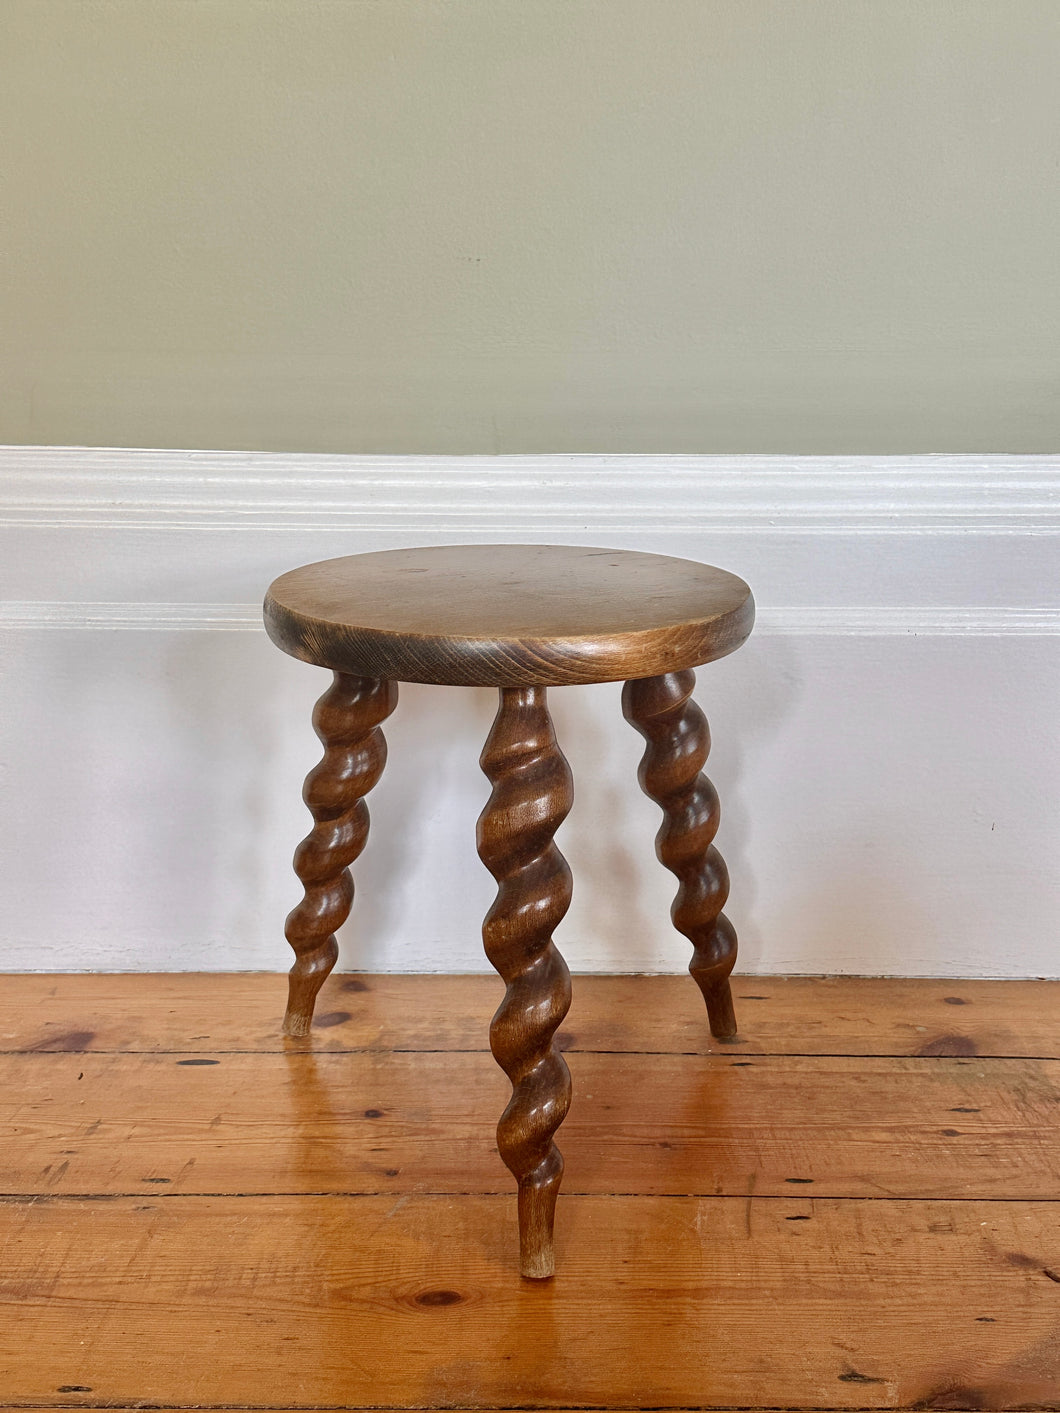 Vintage French Round Stool with Twisted Legs